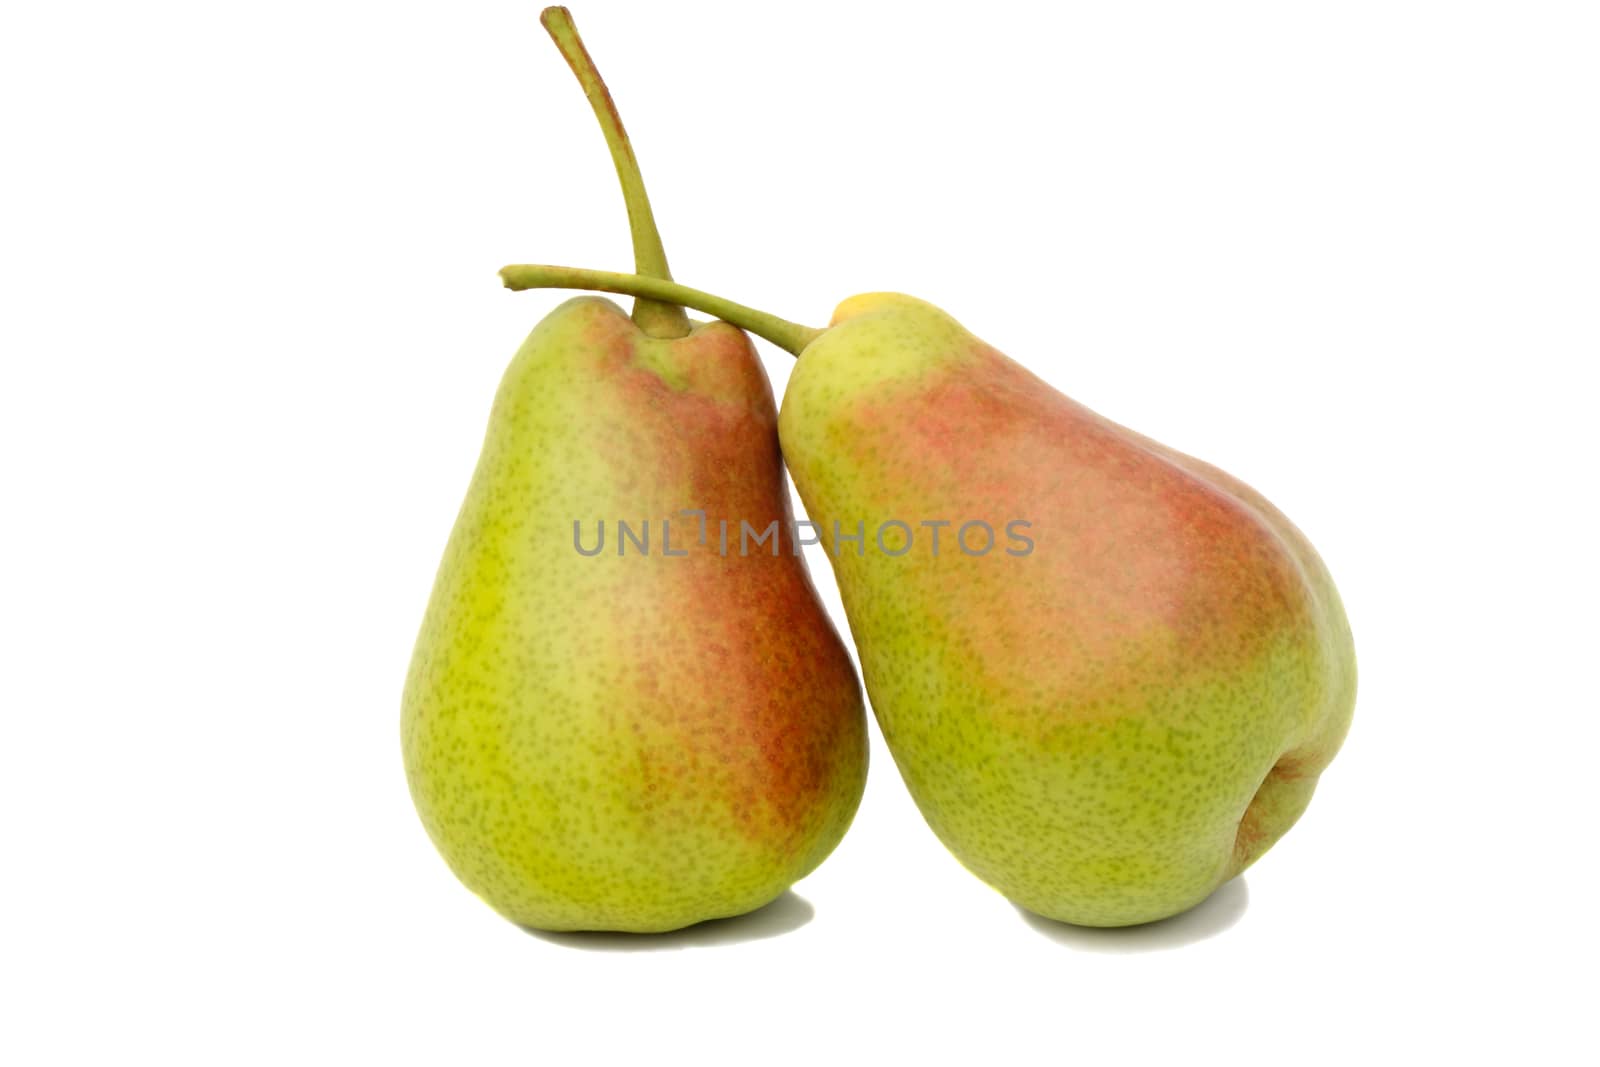 Two ripe large yellow pears. Presented on a white background.